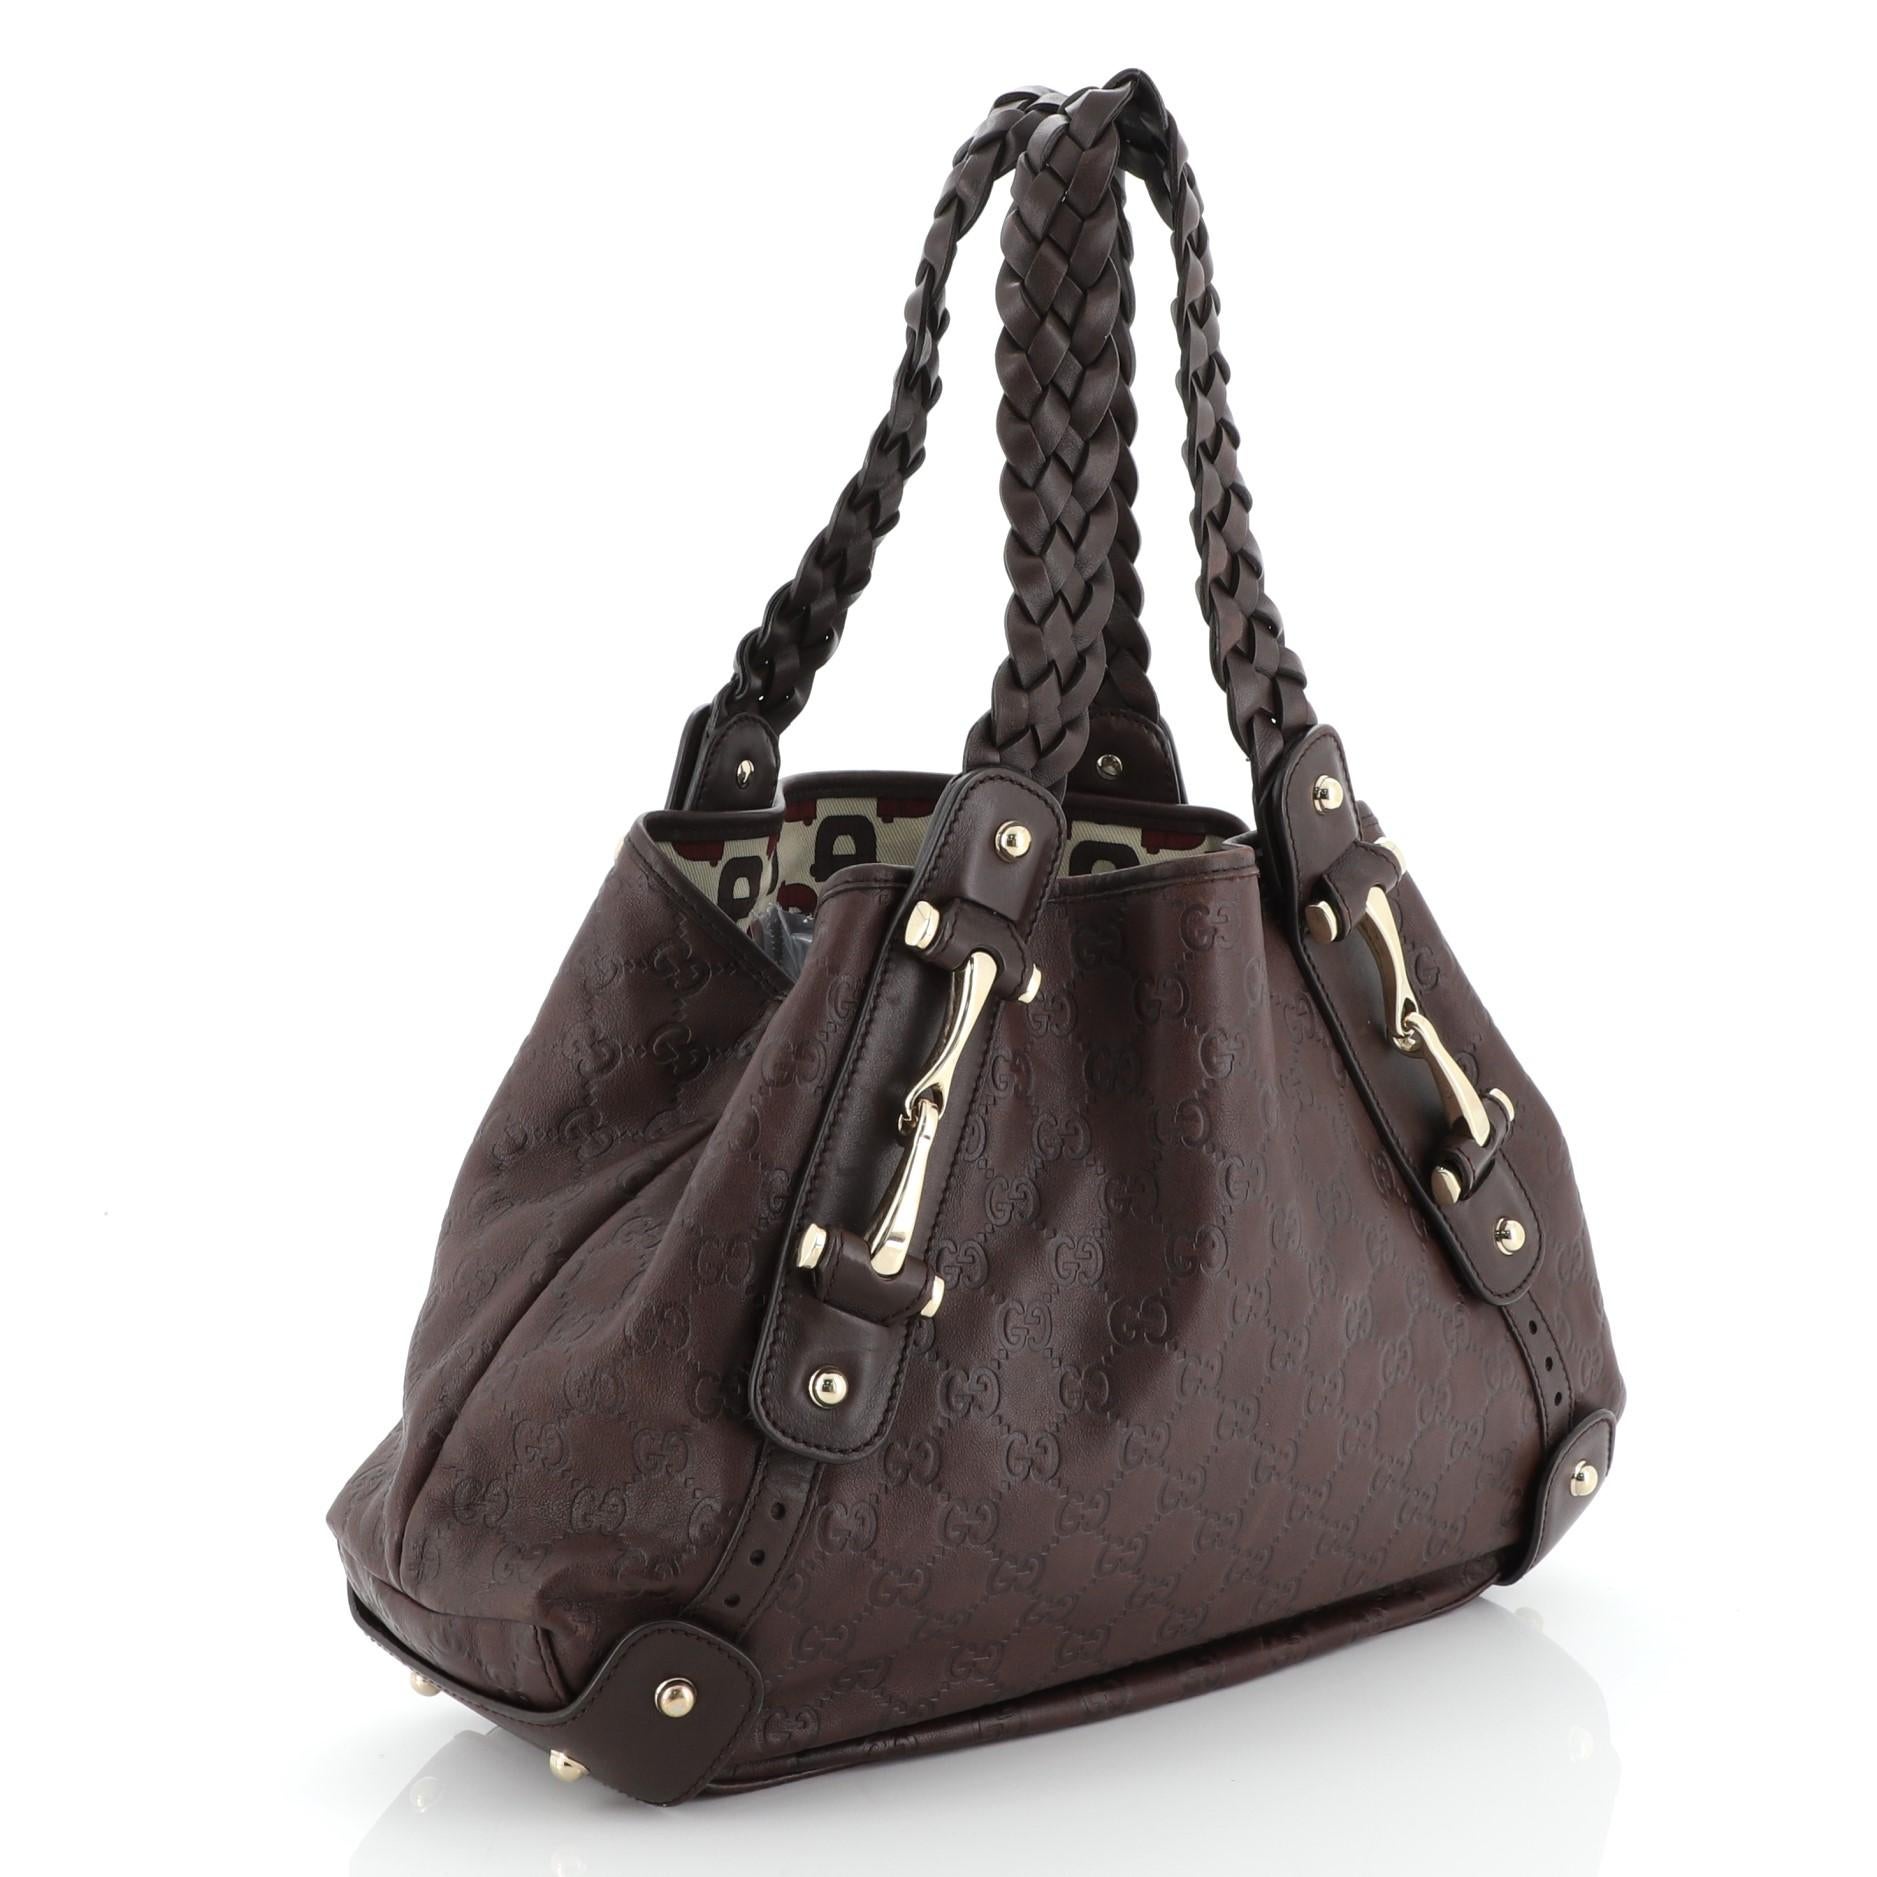 This Gucci Pelham Shoulder Bag Guccissima Leather Small, crafted in brown guccissima leather, features braided leather straps, signature horsebit detailing, and gold-tone hardware. Its wide top opening showcases a neutral printed fabric interior